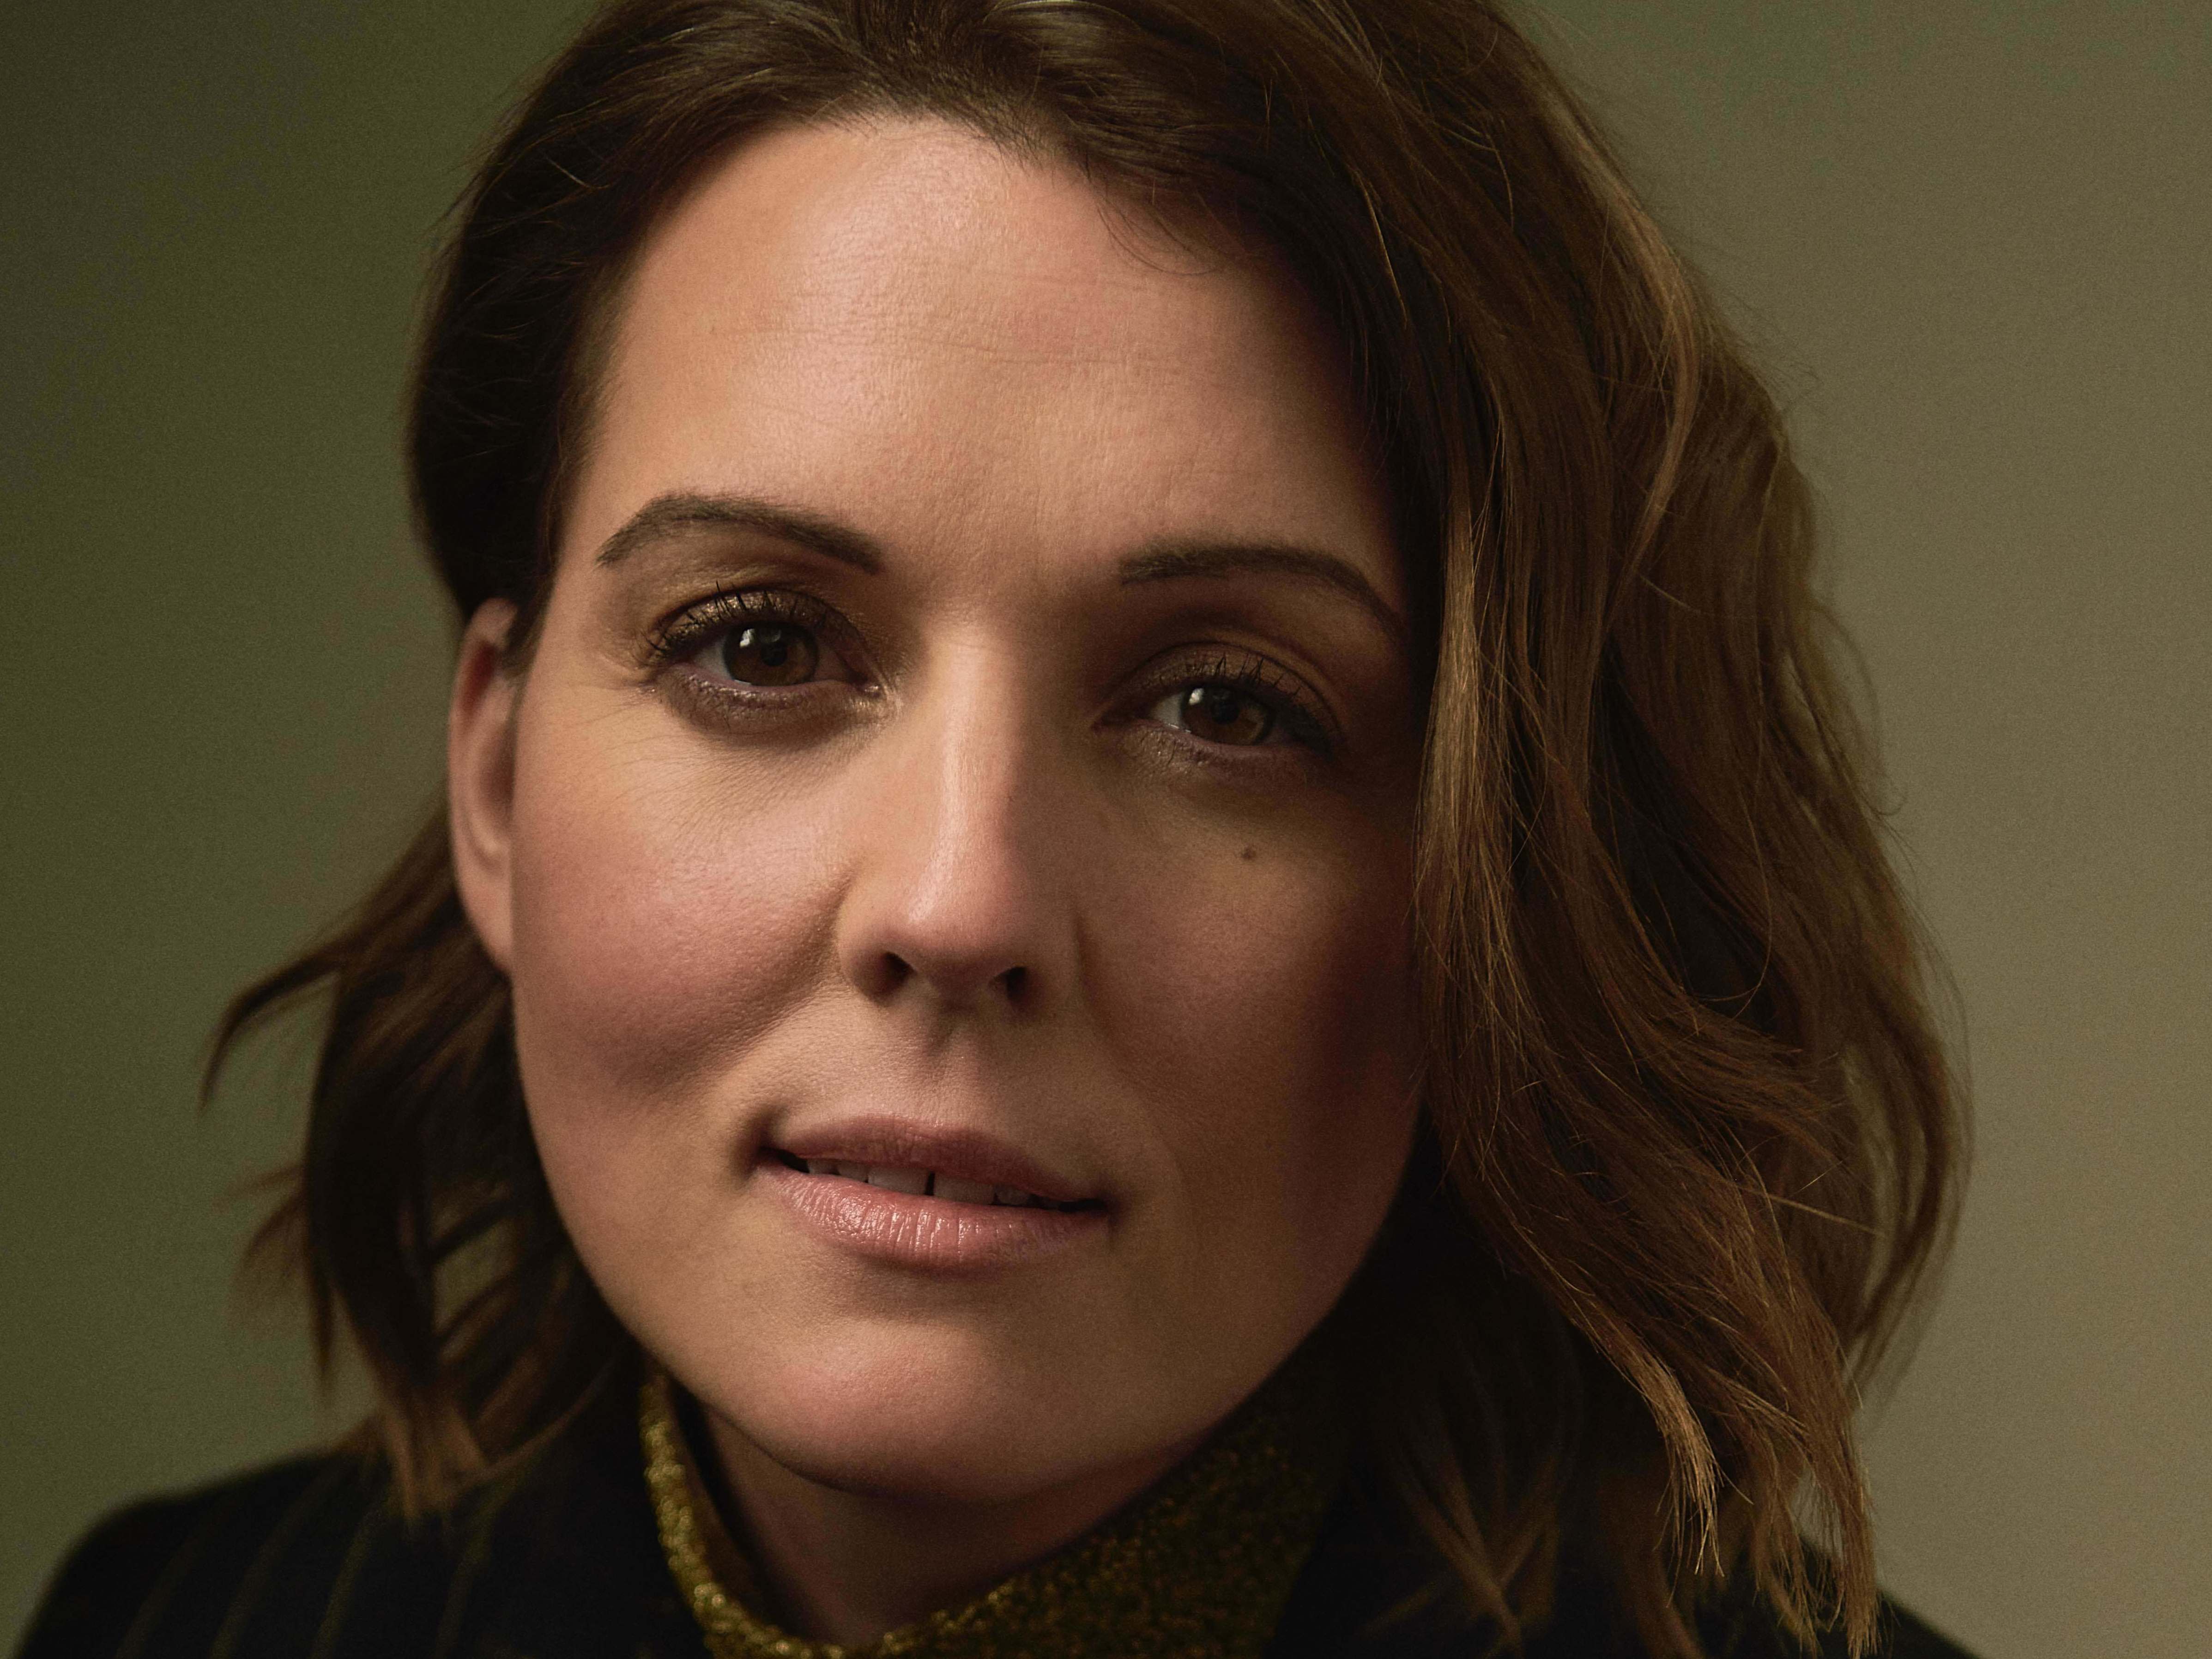 "Queer people love country music," singer-songwriter Brandi Carlile says. "... We just don't think that it's going to open its doors to us. And when it does, it's wildly satisfying." Austin Hargrave/AUGUST